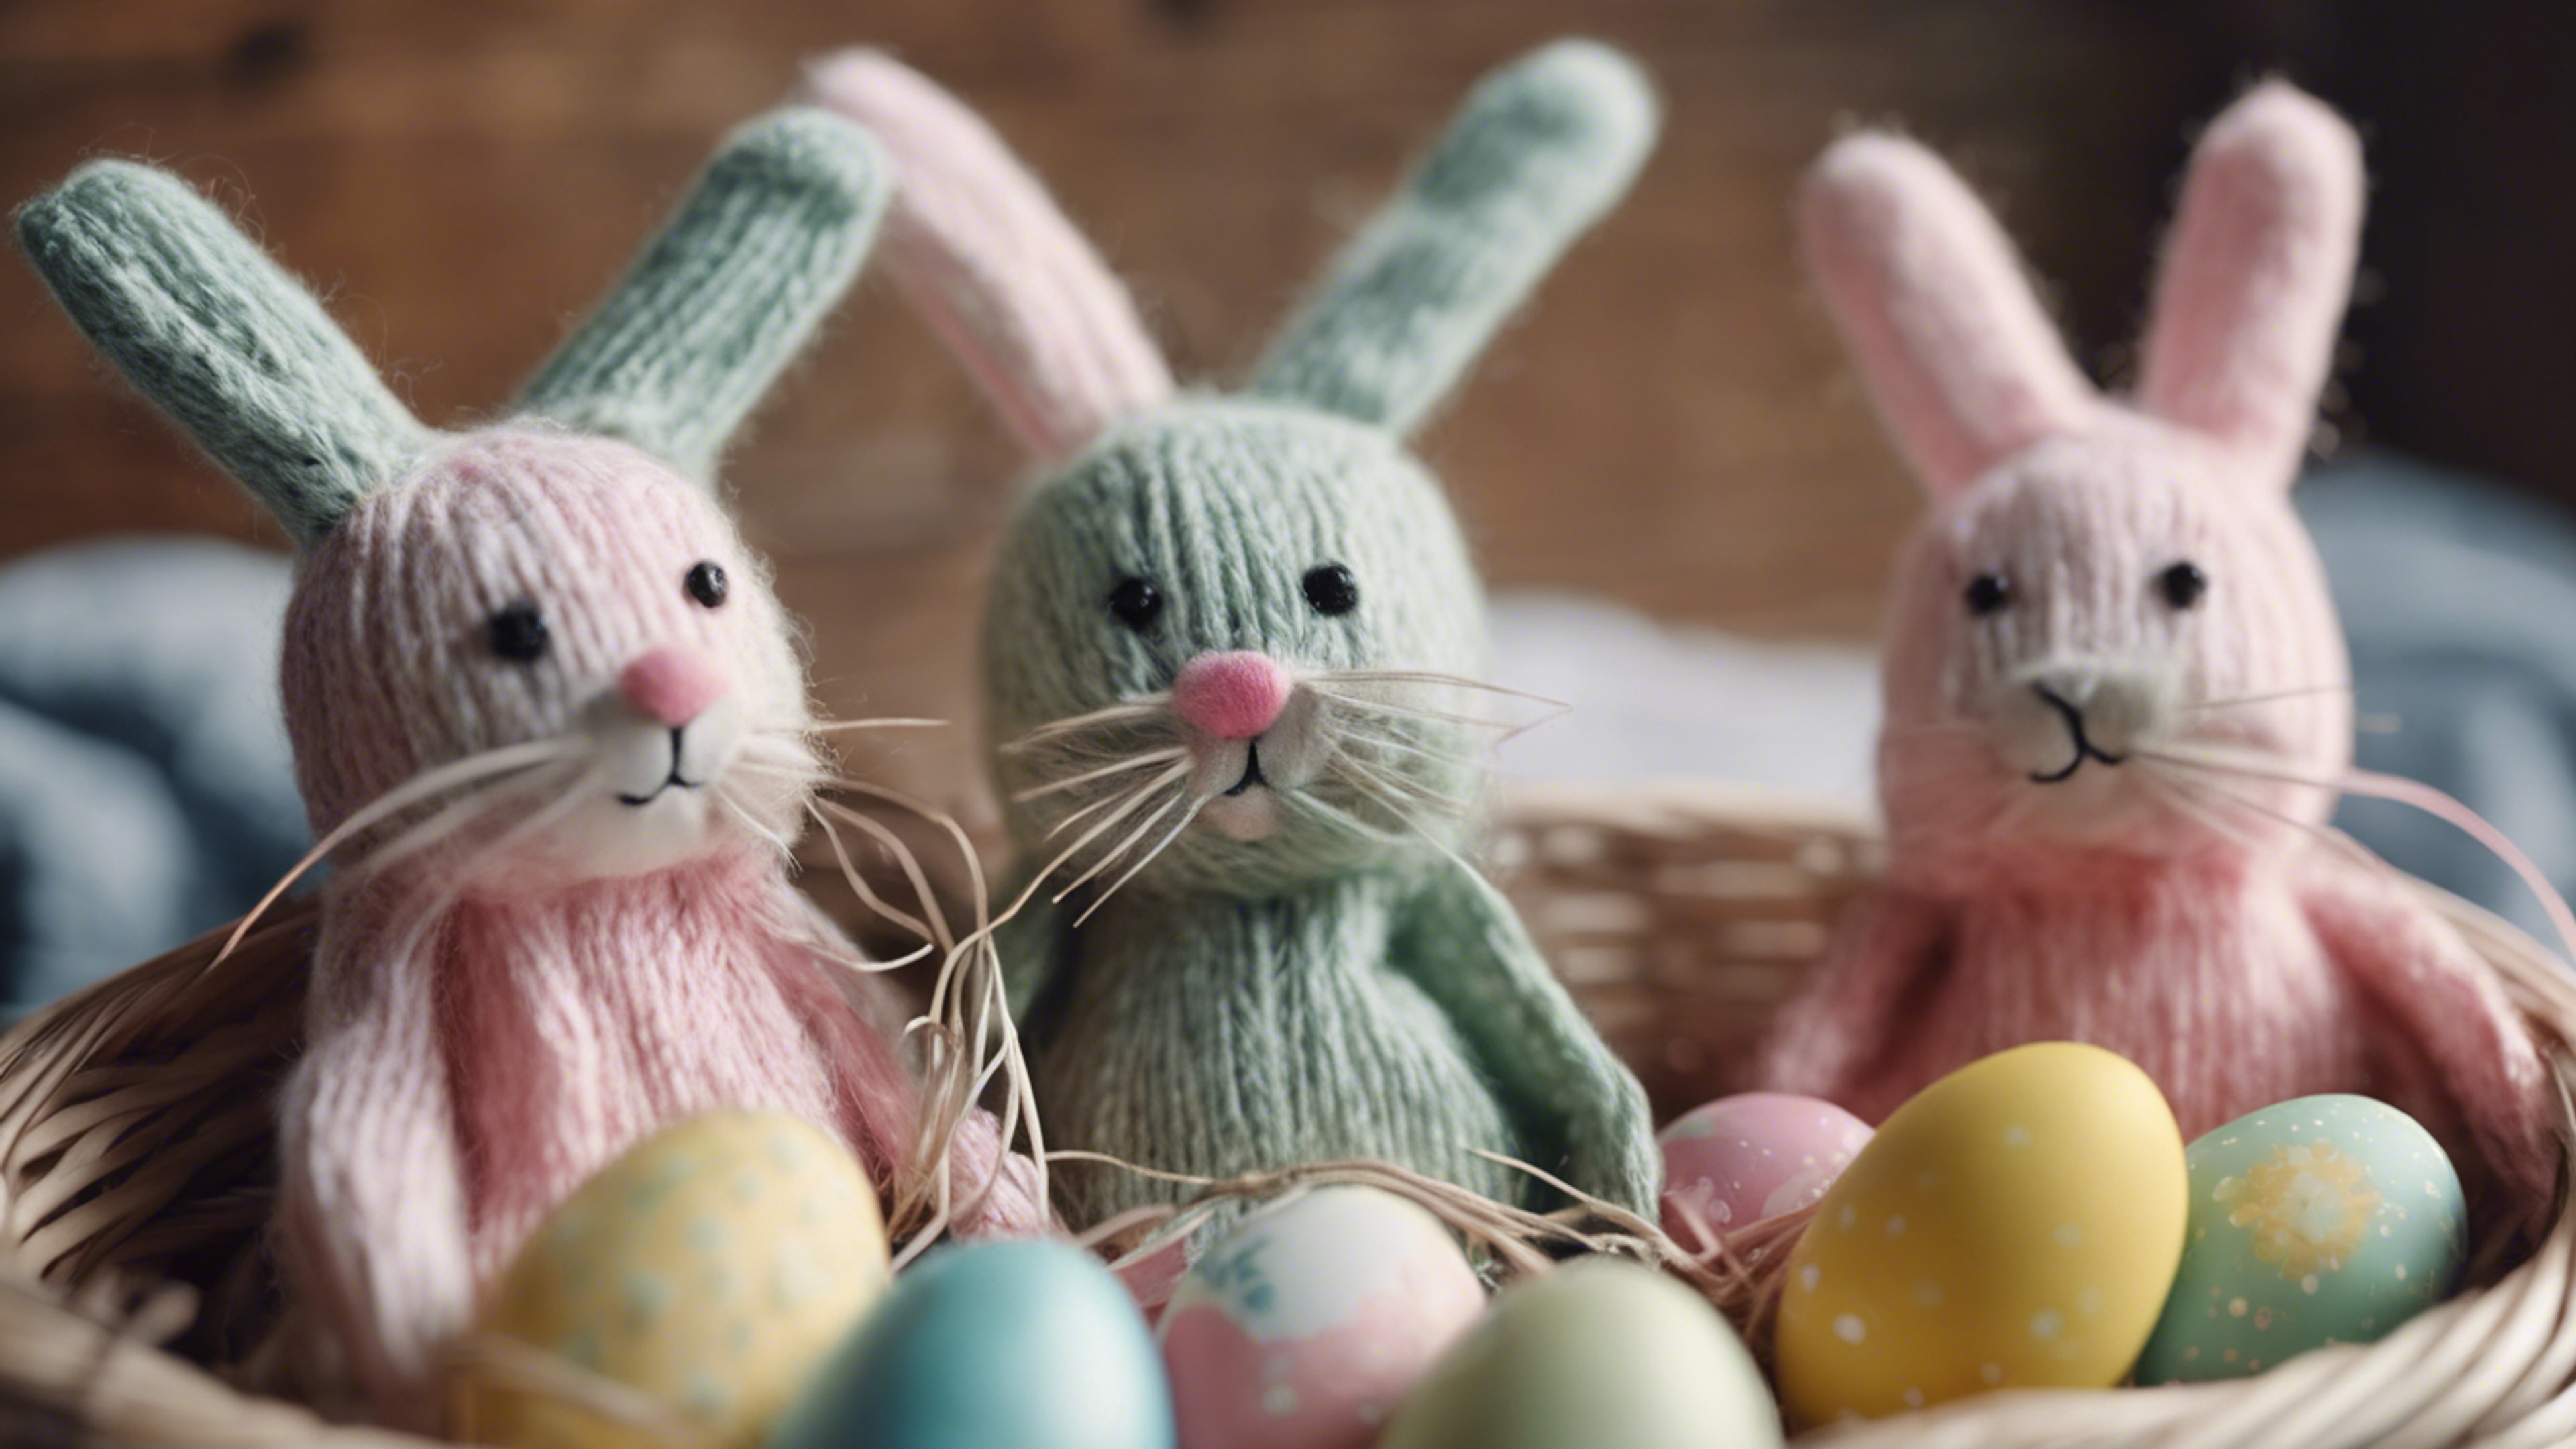 Homemade sock bunnies with twine whiskers, sitting in a cozy Easter basket.壁紙[6d67e9ac509f498599cb]